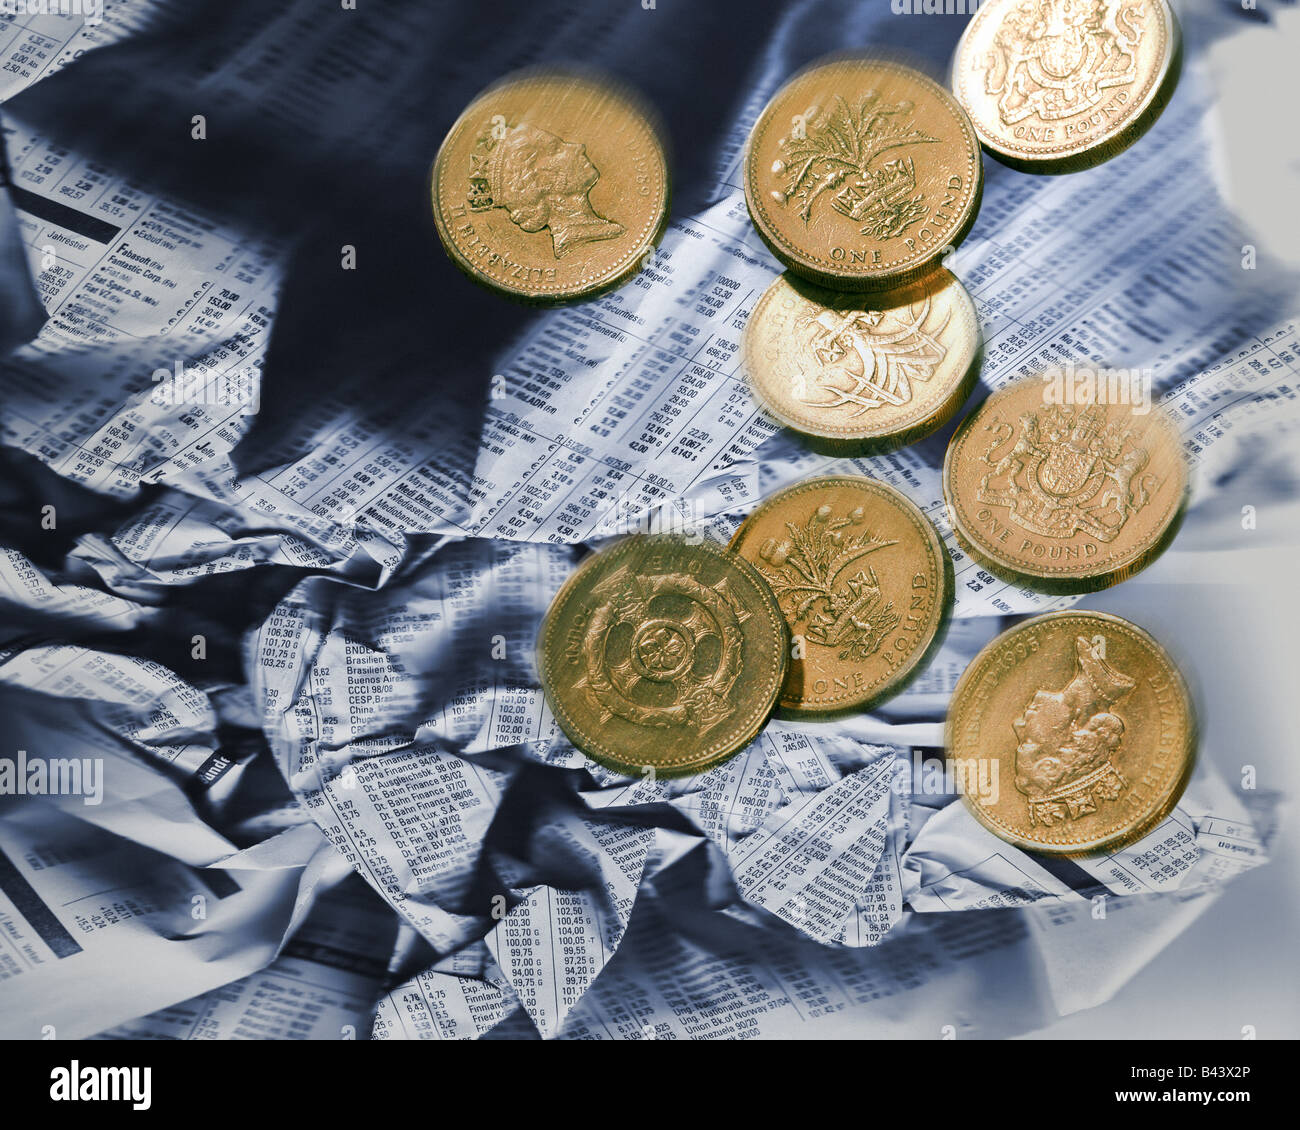 FINANCIAL CONCEPT: Credit Crunch Stock Photo